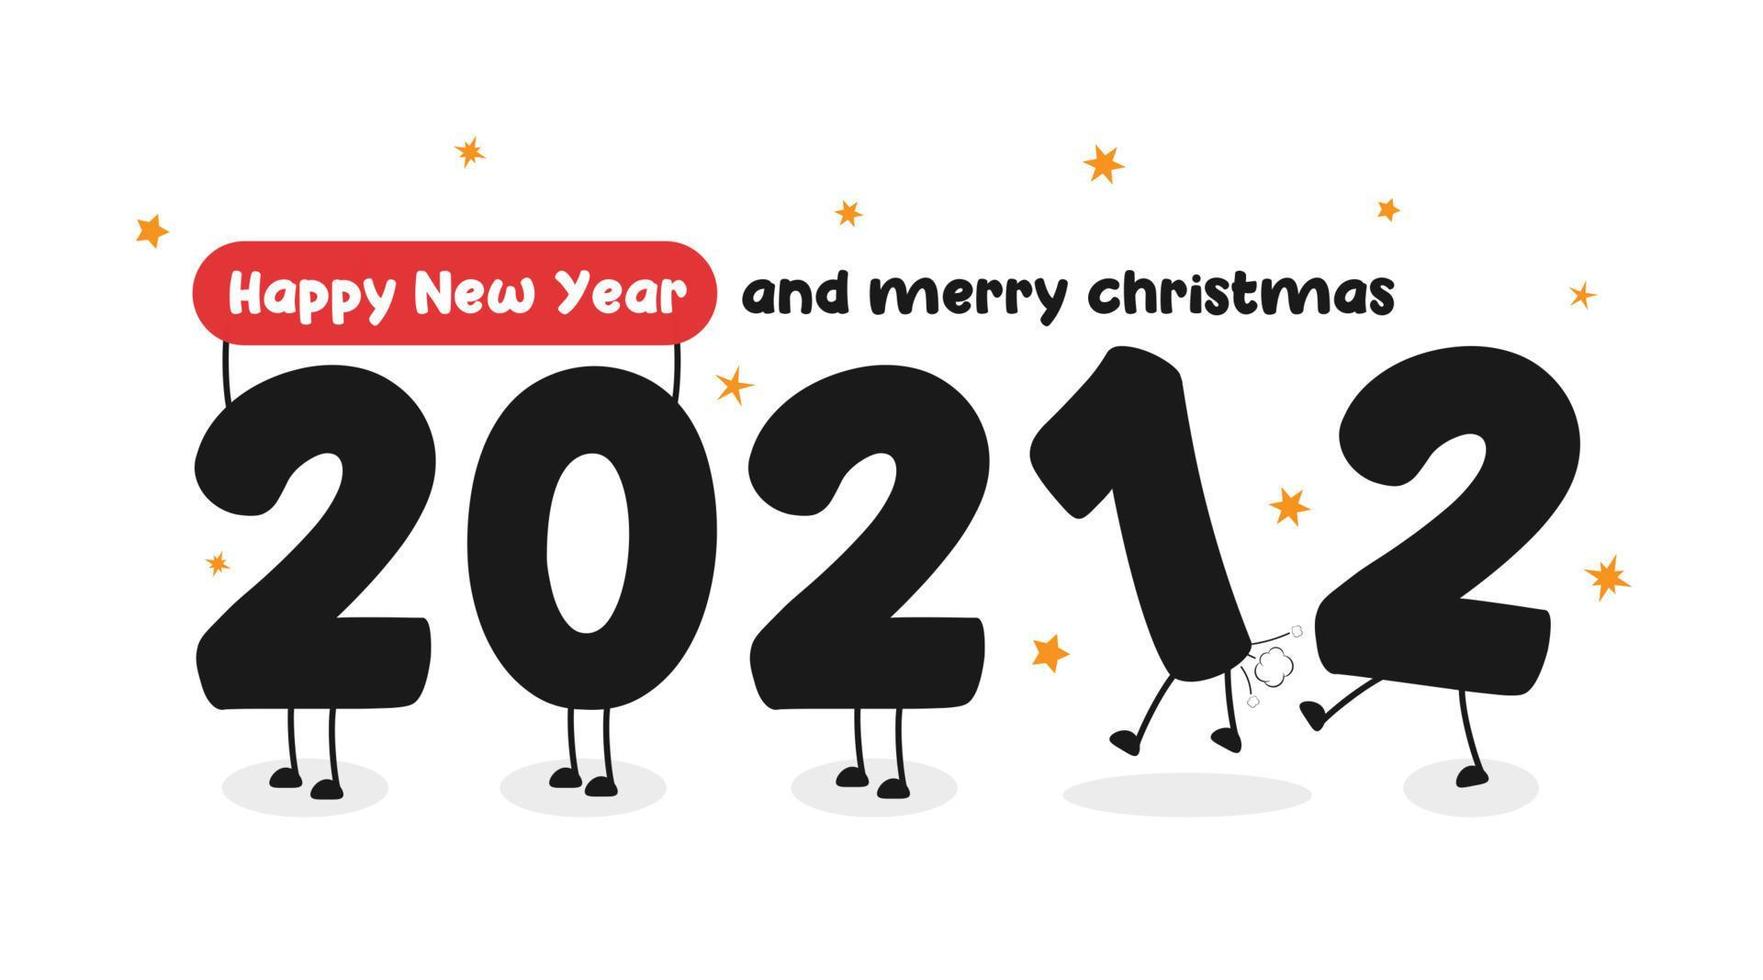 New Year 2022 numbers 2022 kicks off 2021 Happy New Year and Merry Christmas vector